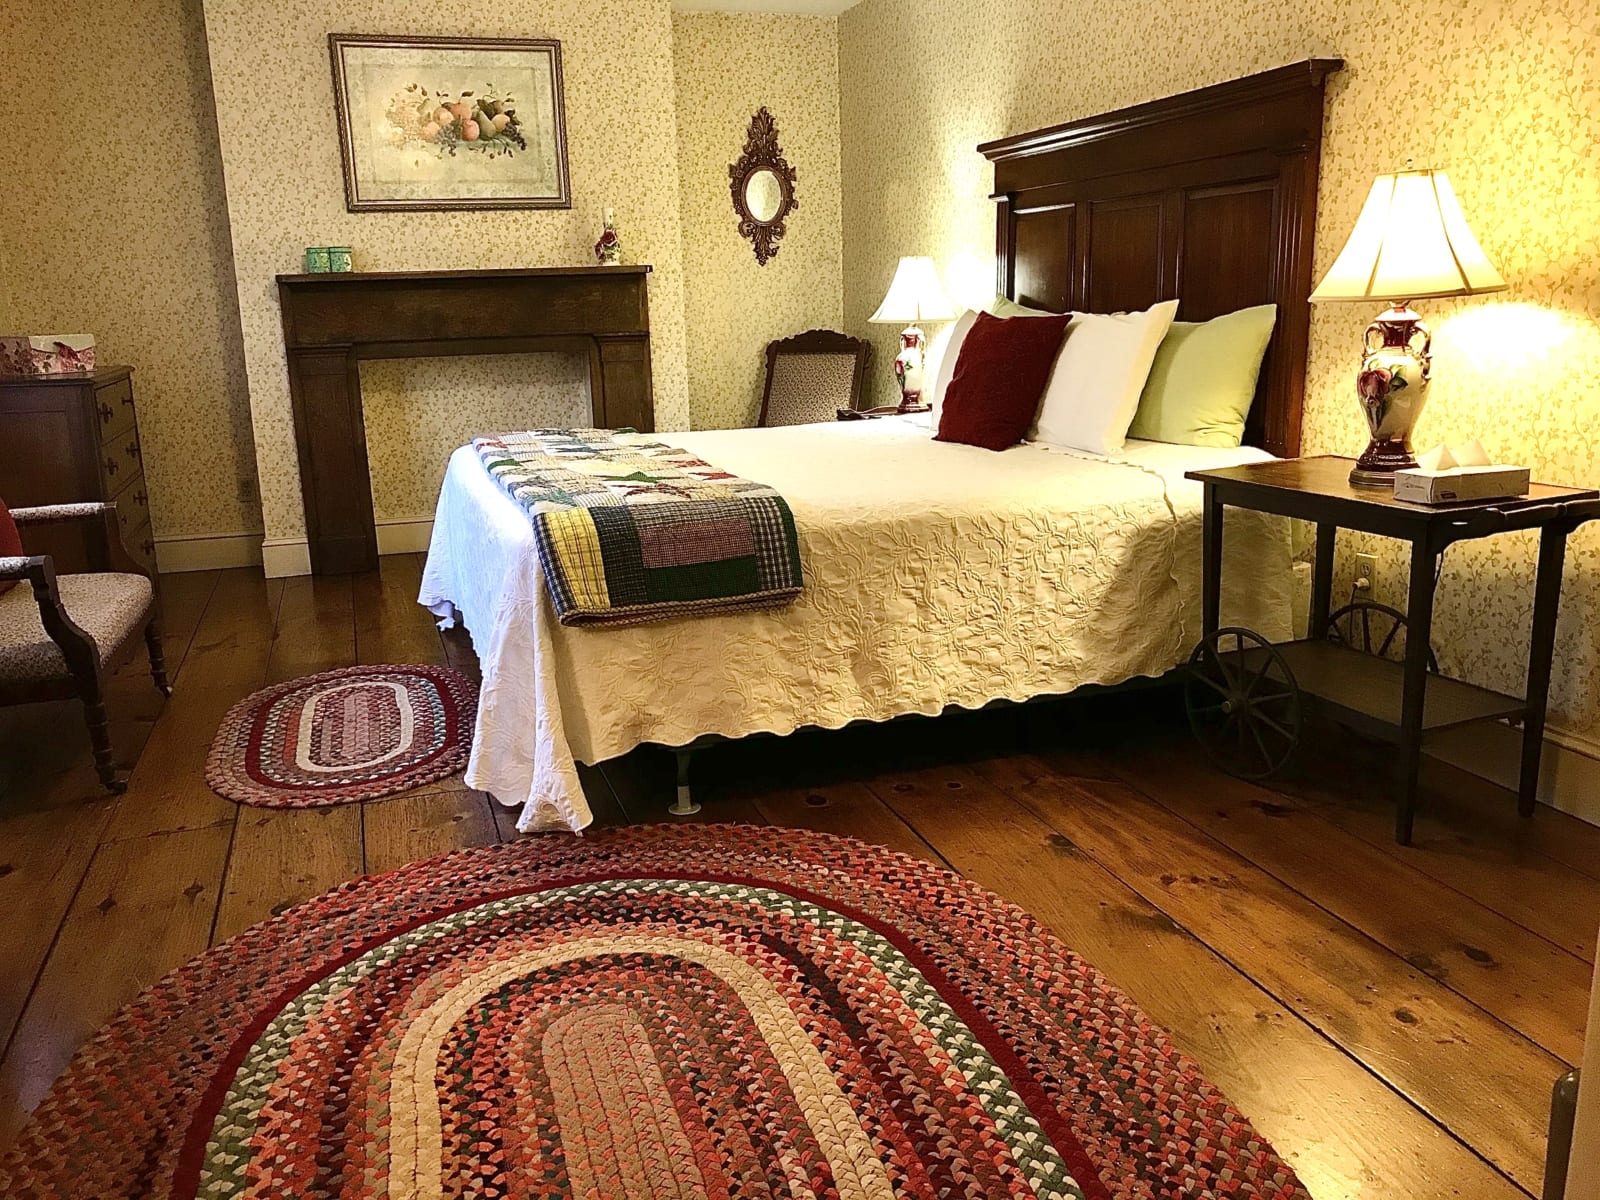 Country hotel room with braided rug.